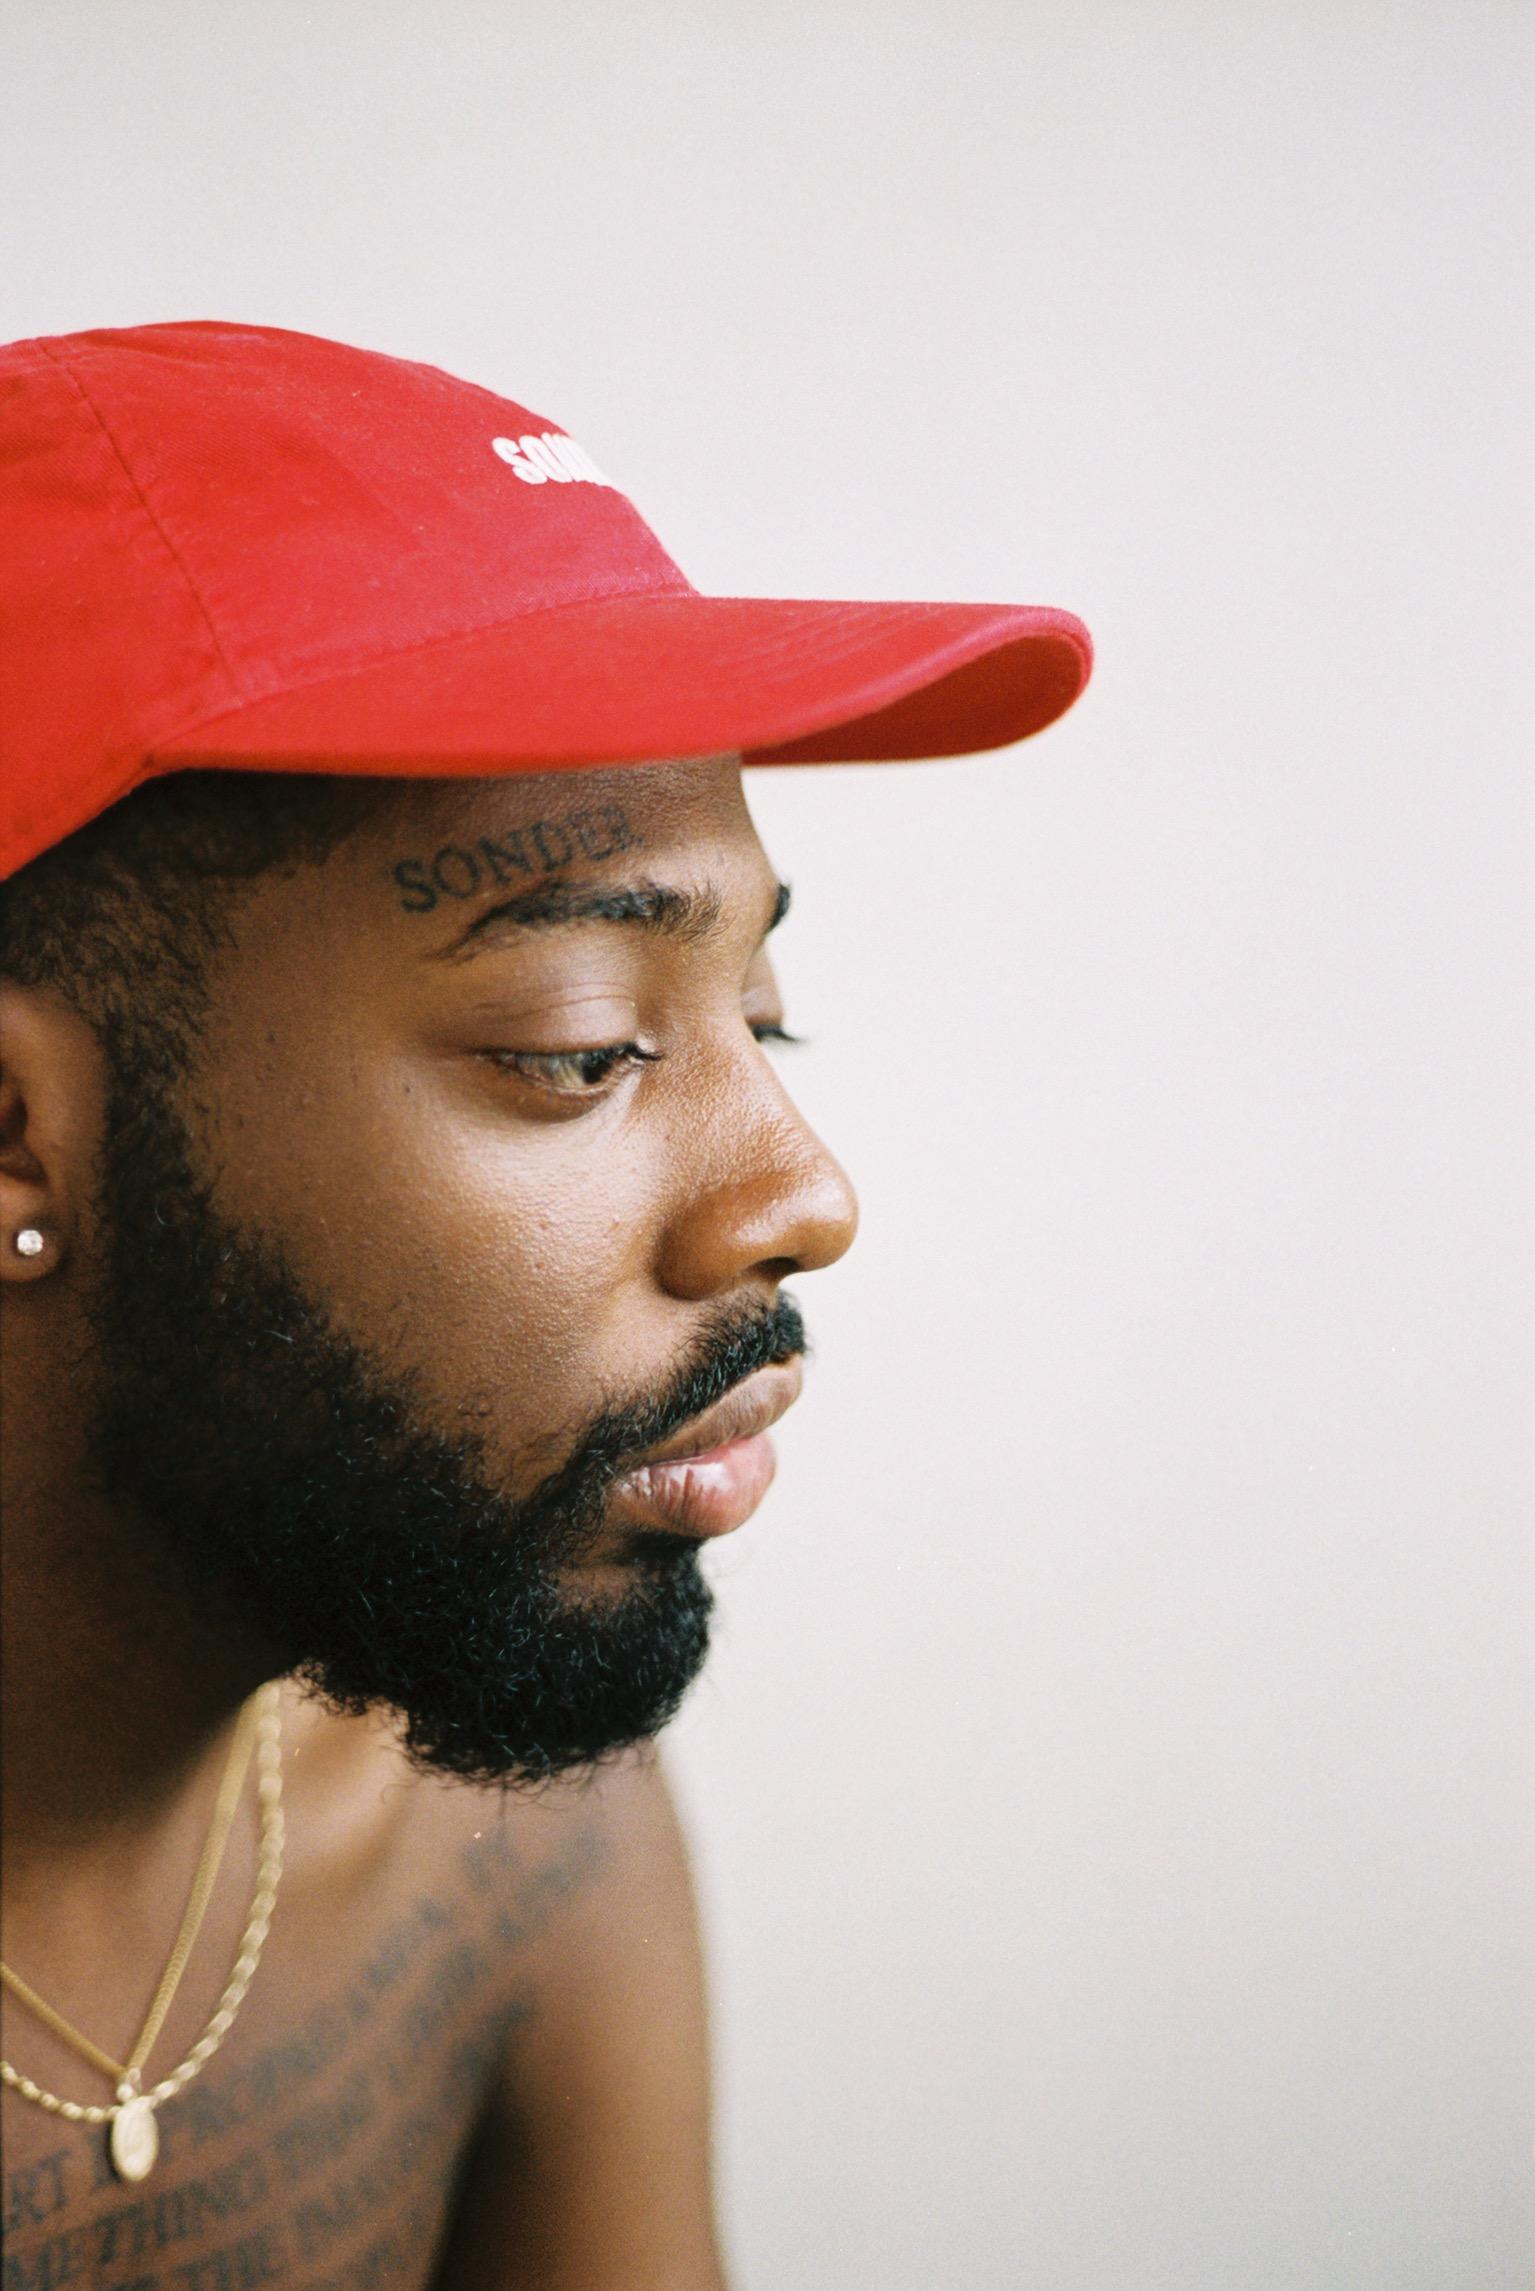 ALL MINE Brent faiyaz wallpaper by emamaamma  Download on ZEDGE  1dd1